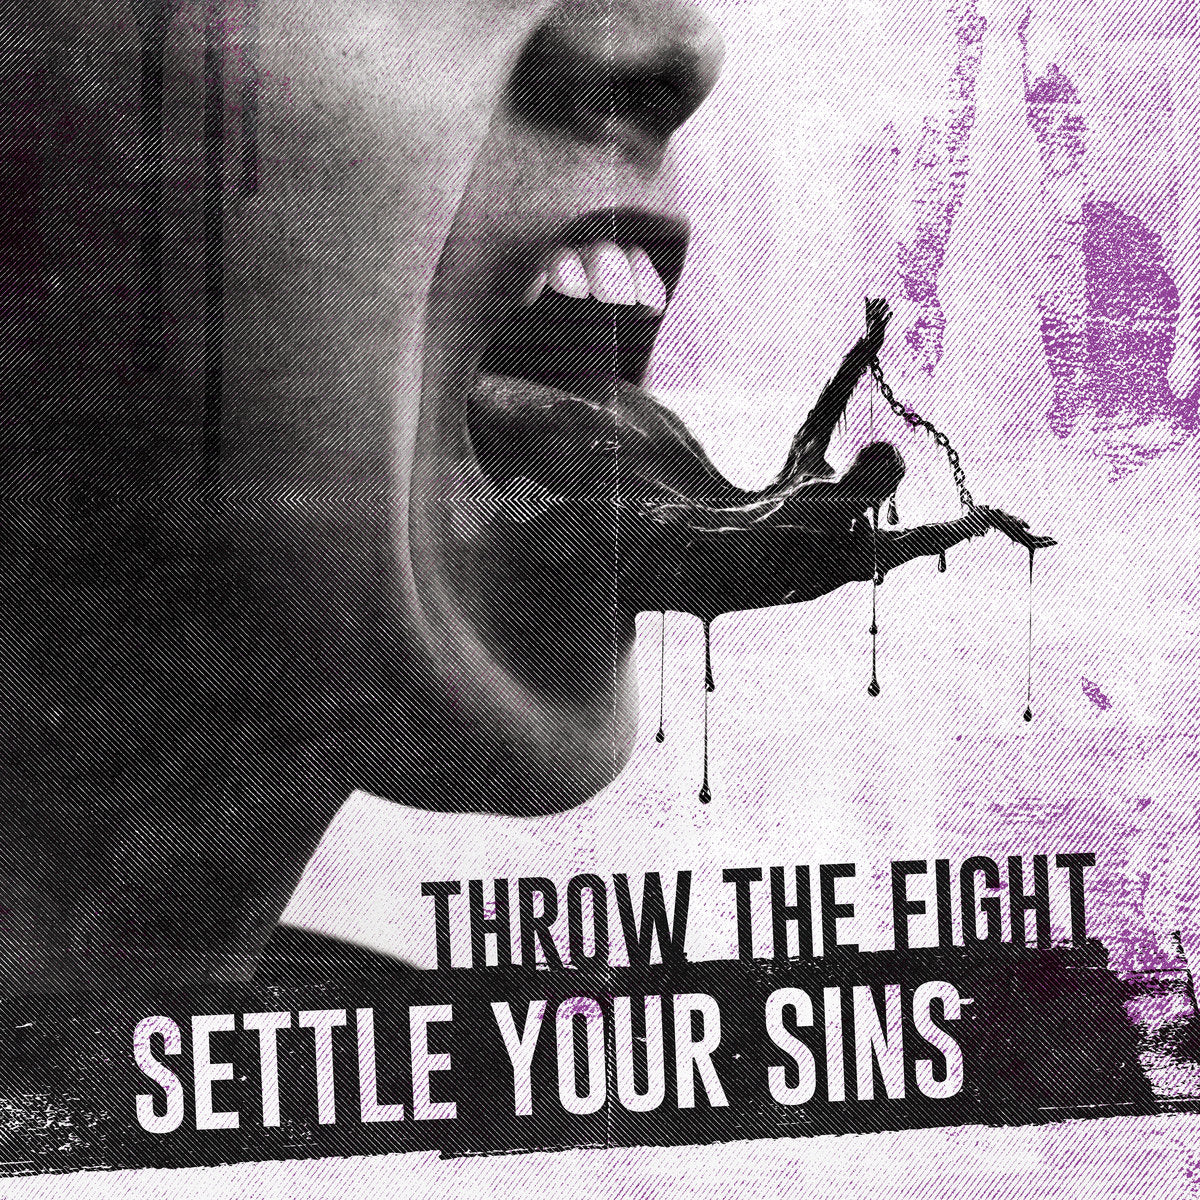 Throw The Fight "Settle The Sins" CD